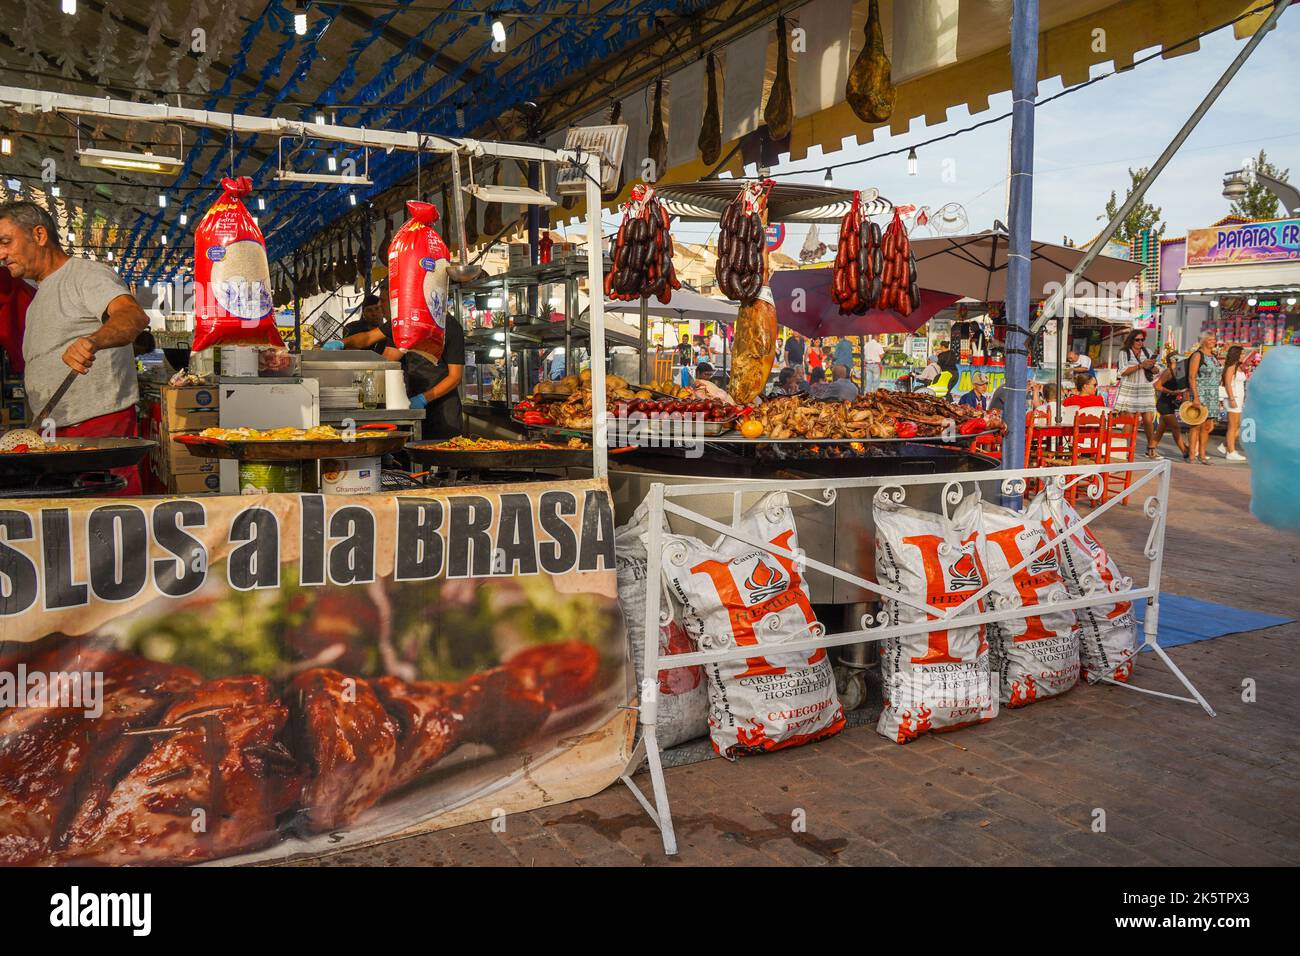 Food stand meat, at annual celebration of the festive Feria in Fuengirola, Costa del Sol, Spain. Stock Photo